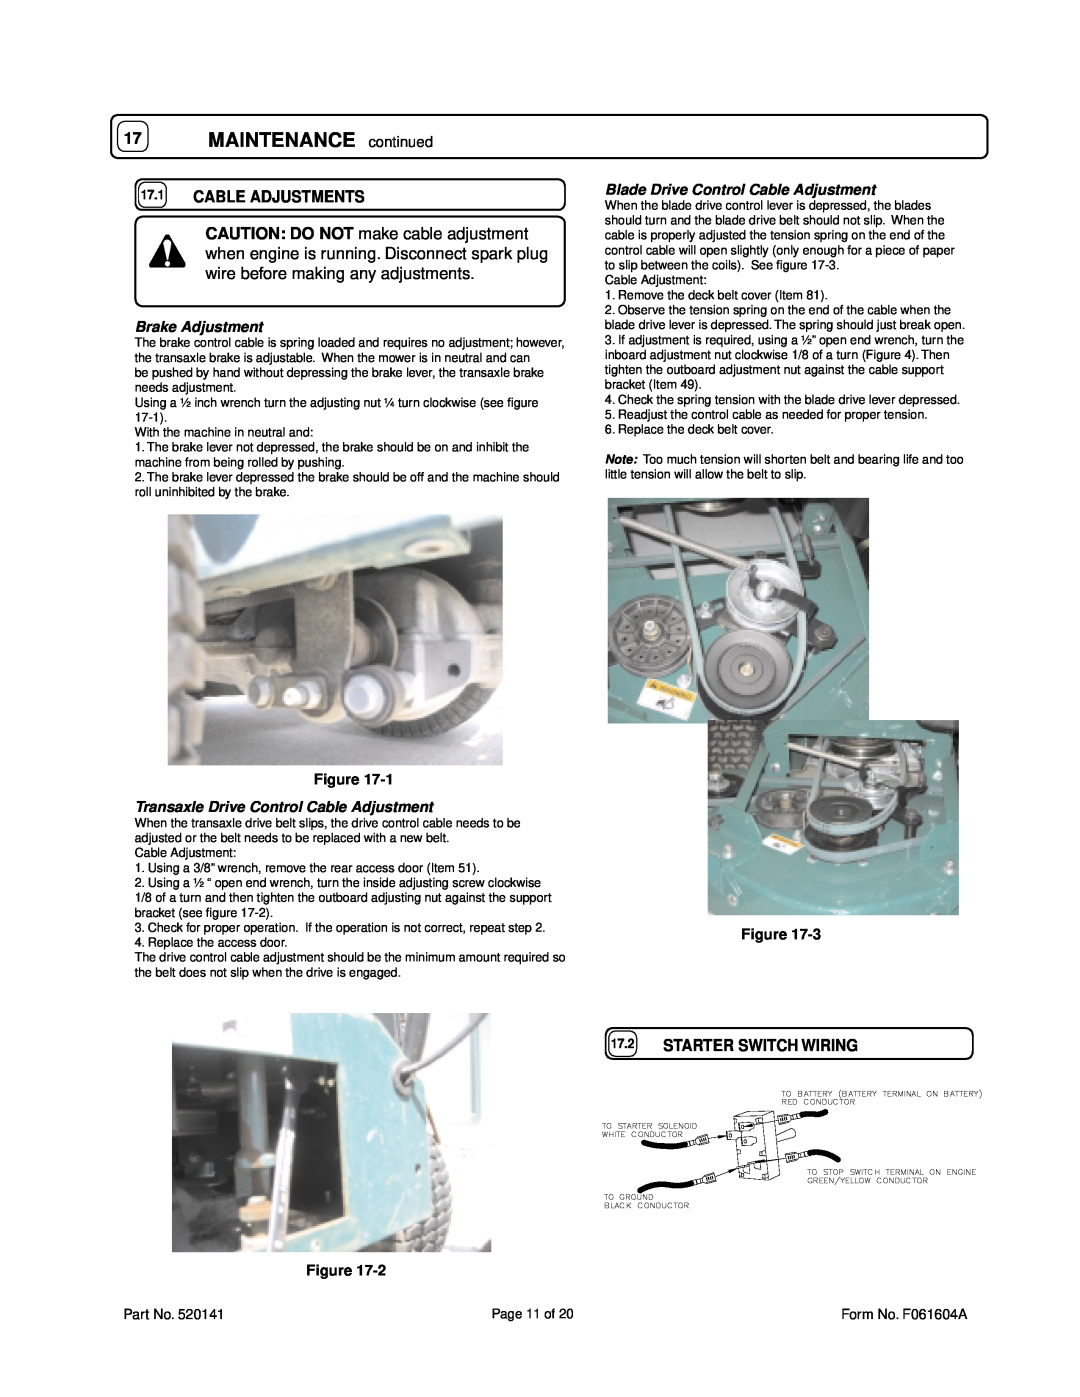 Briggs & Stratton FM3300E owner manual MAINTENANCE continued, Brake Adjustment, Transaxle Drive Control Cable Adjustment 